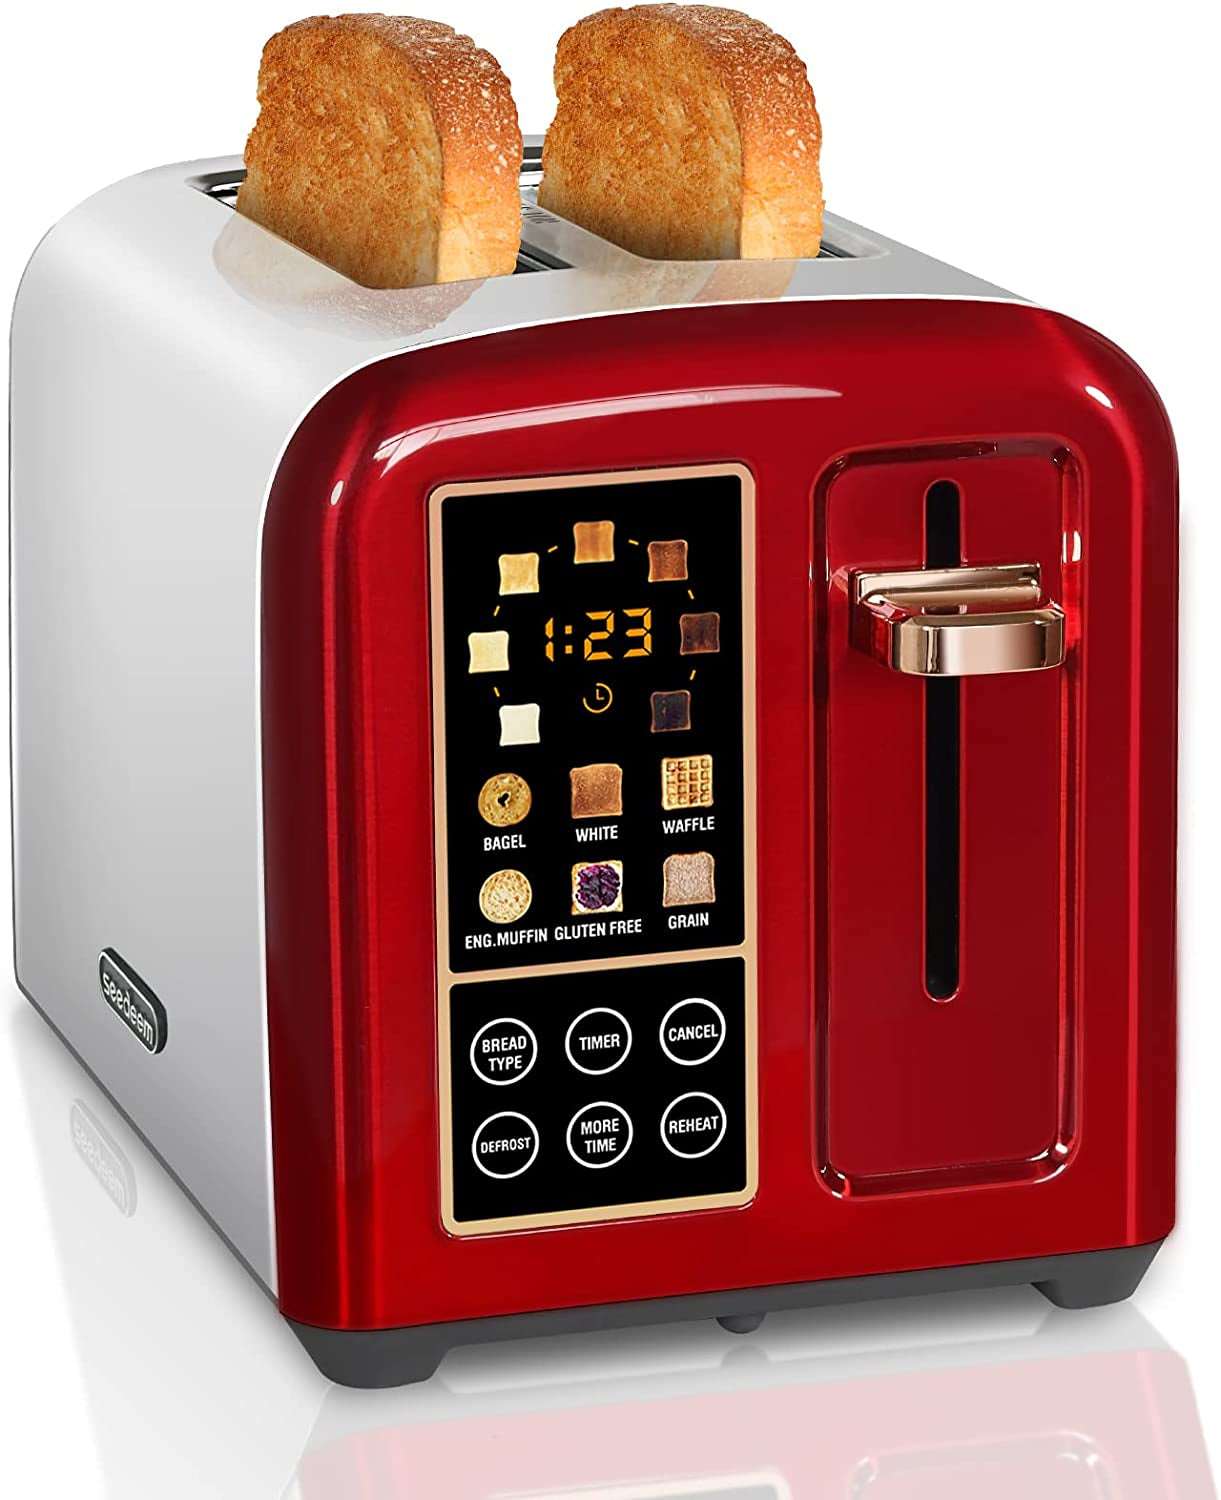 Toaster 2 Slice, Stainless Steel Bread Toaster with LCD Display and Touch Buttons, 50% Faster Heating Speed, 6 Bread Selection, 7 Shade Settings, 1.5''Wide Slots Toaster with Cancel/Defrost/Reheat Functions, Removable Crumb Tray, 1350W, Silver Metallic